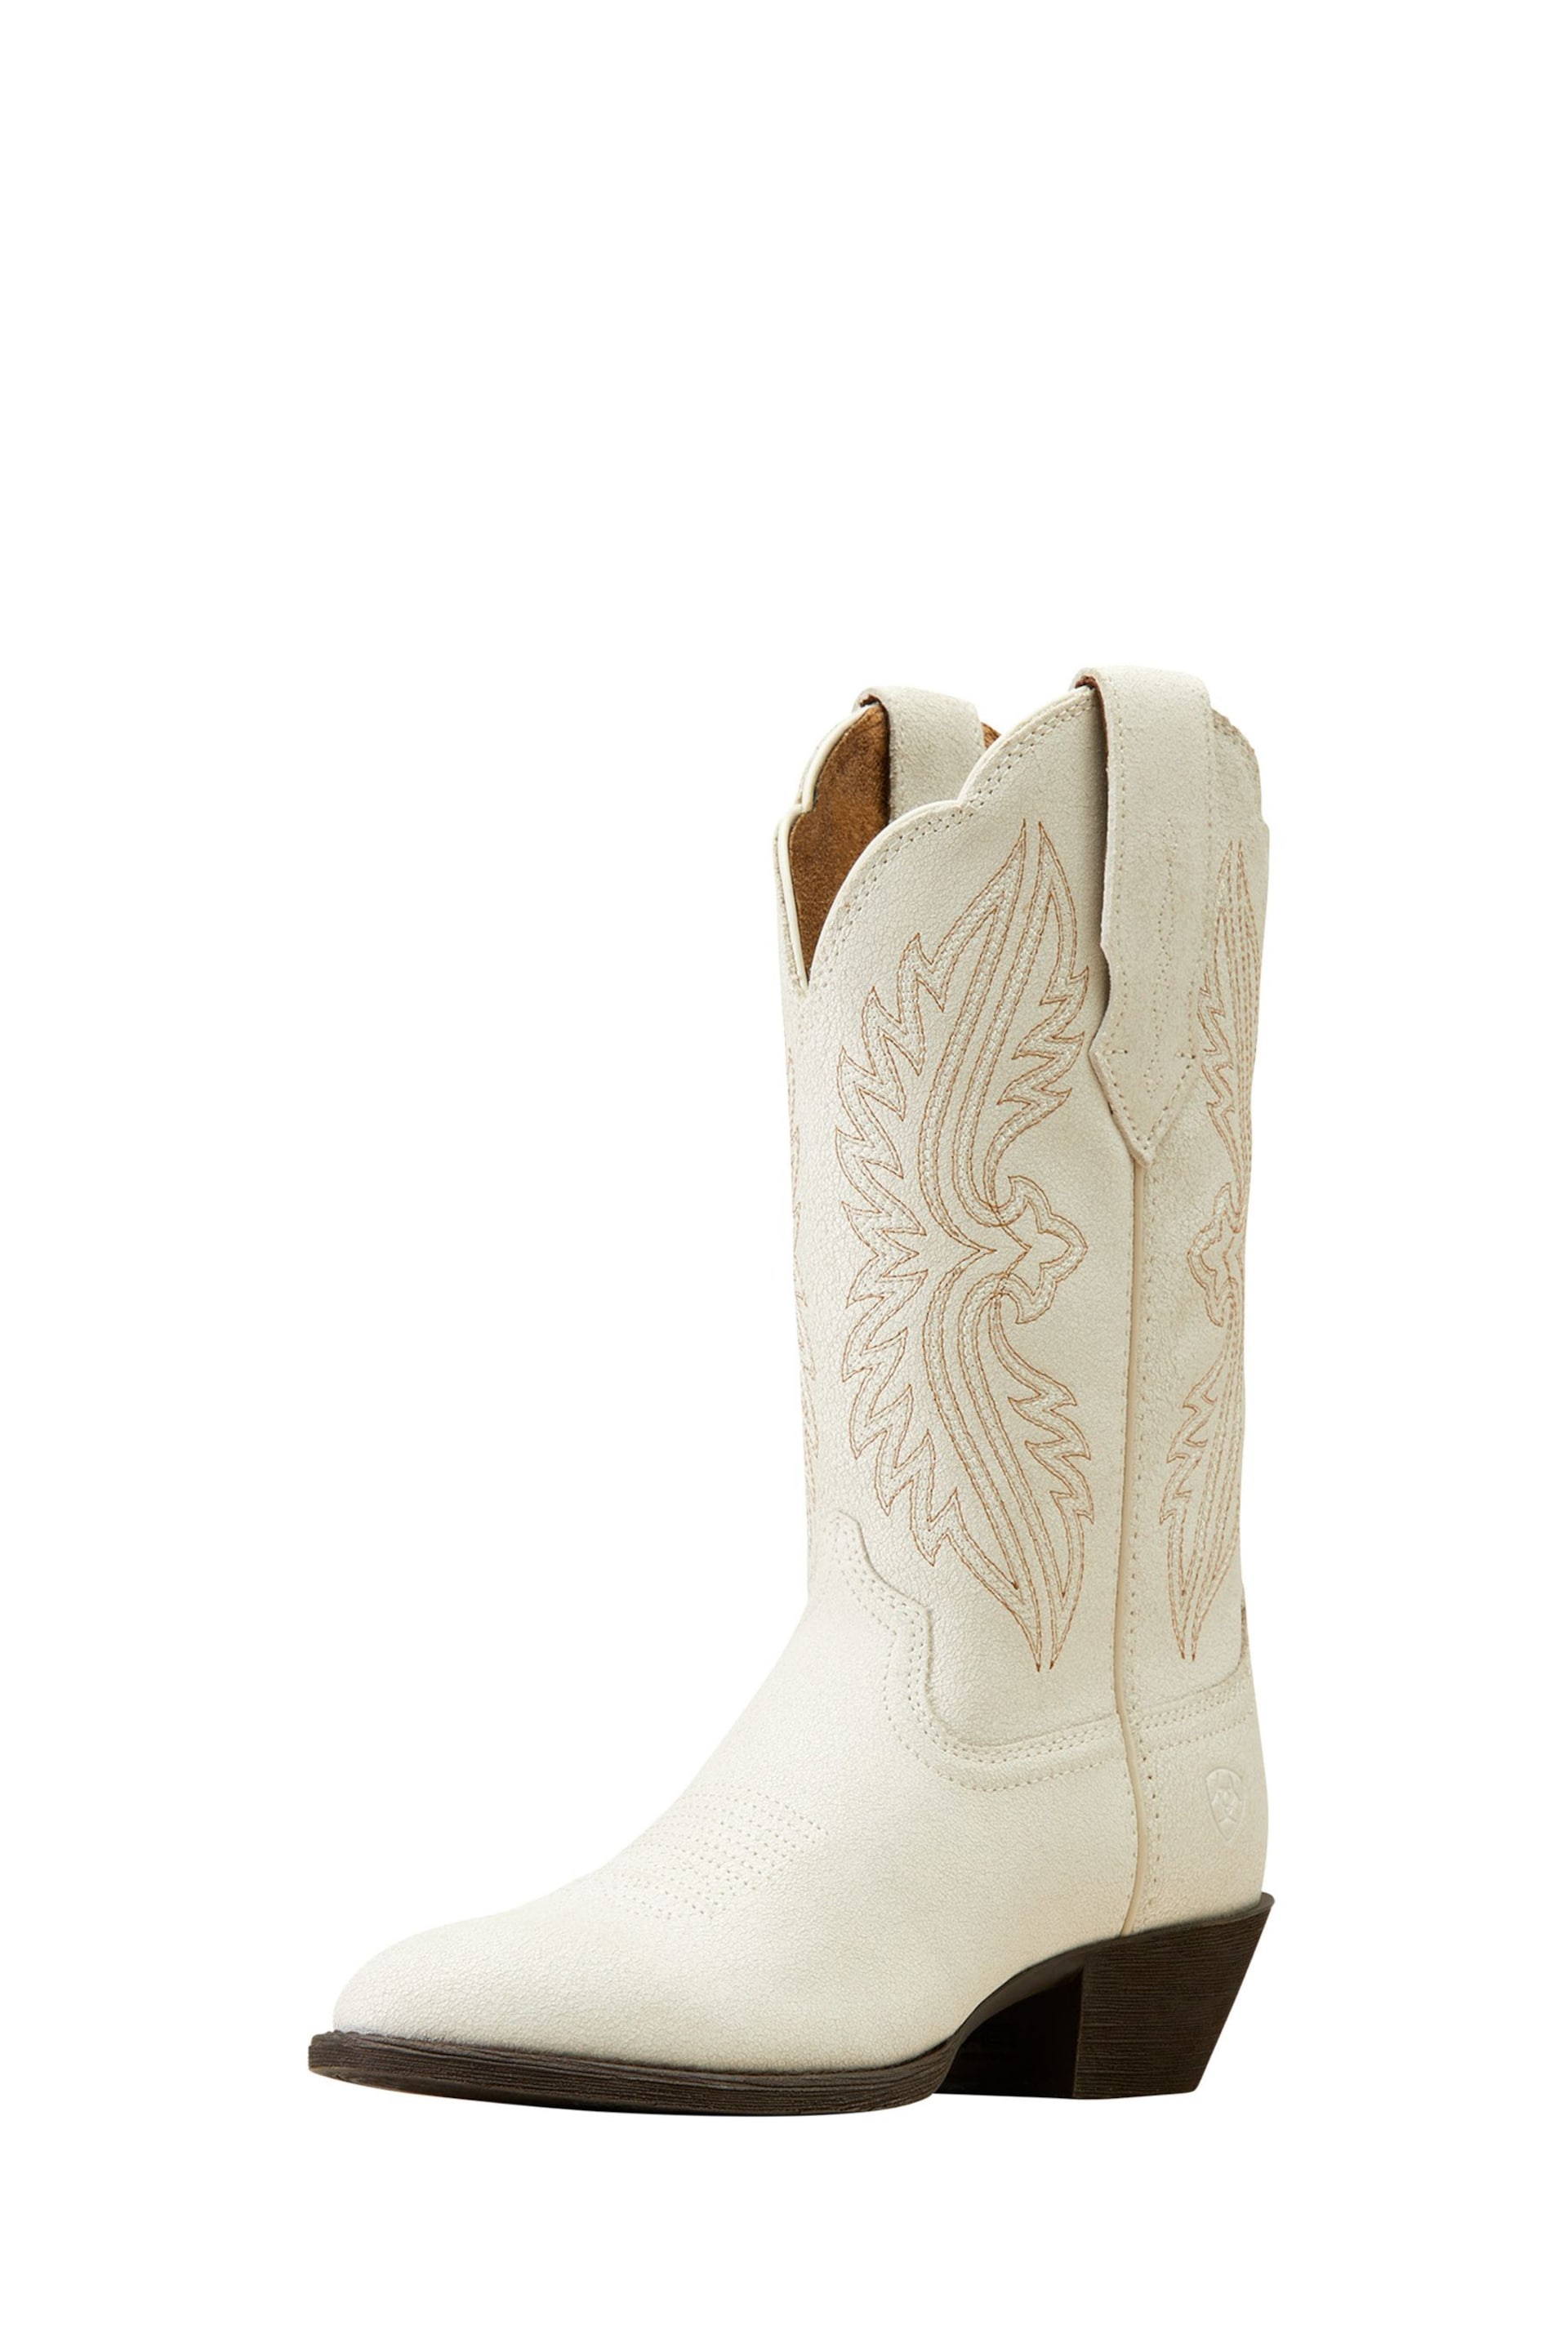 Ariat Heritage R Toe Strech Fit Boots - Image 2 of 3